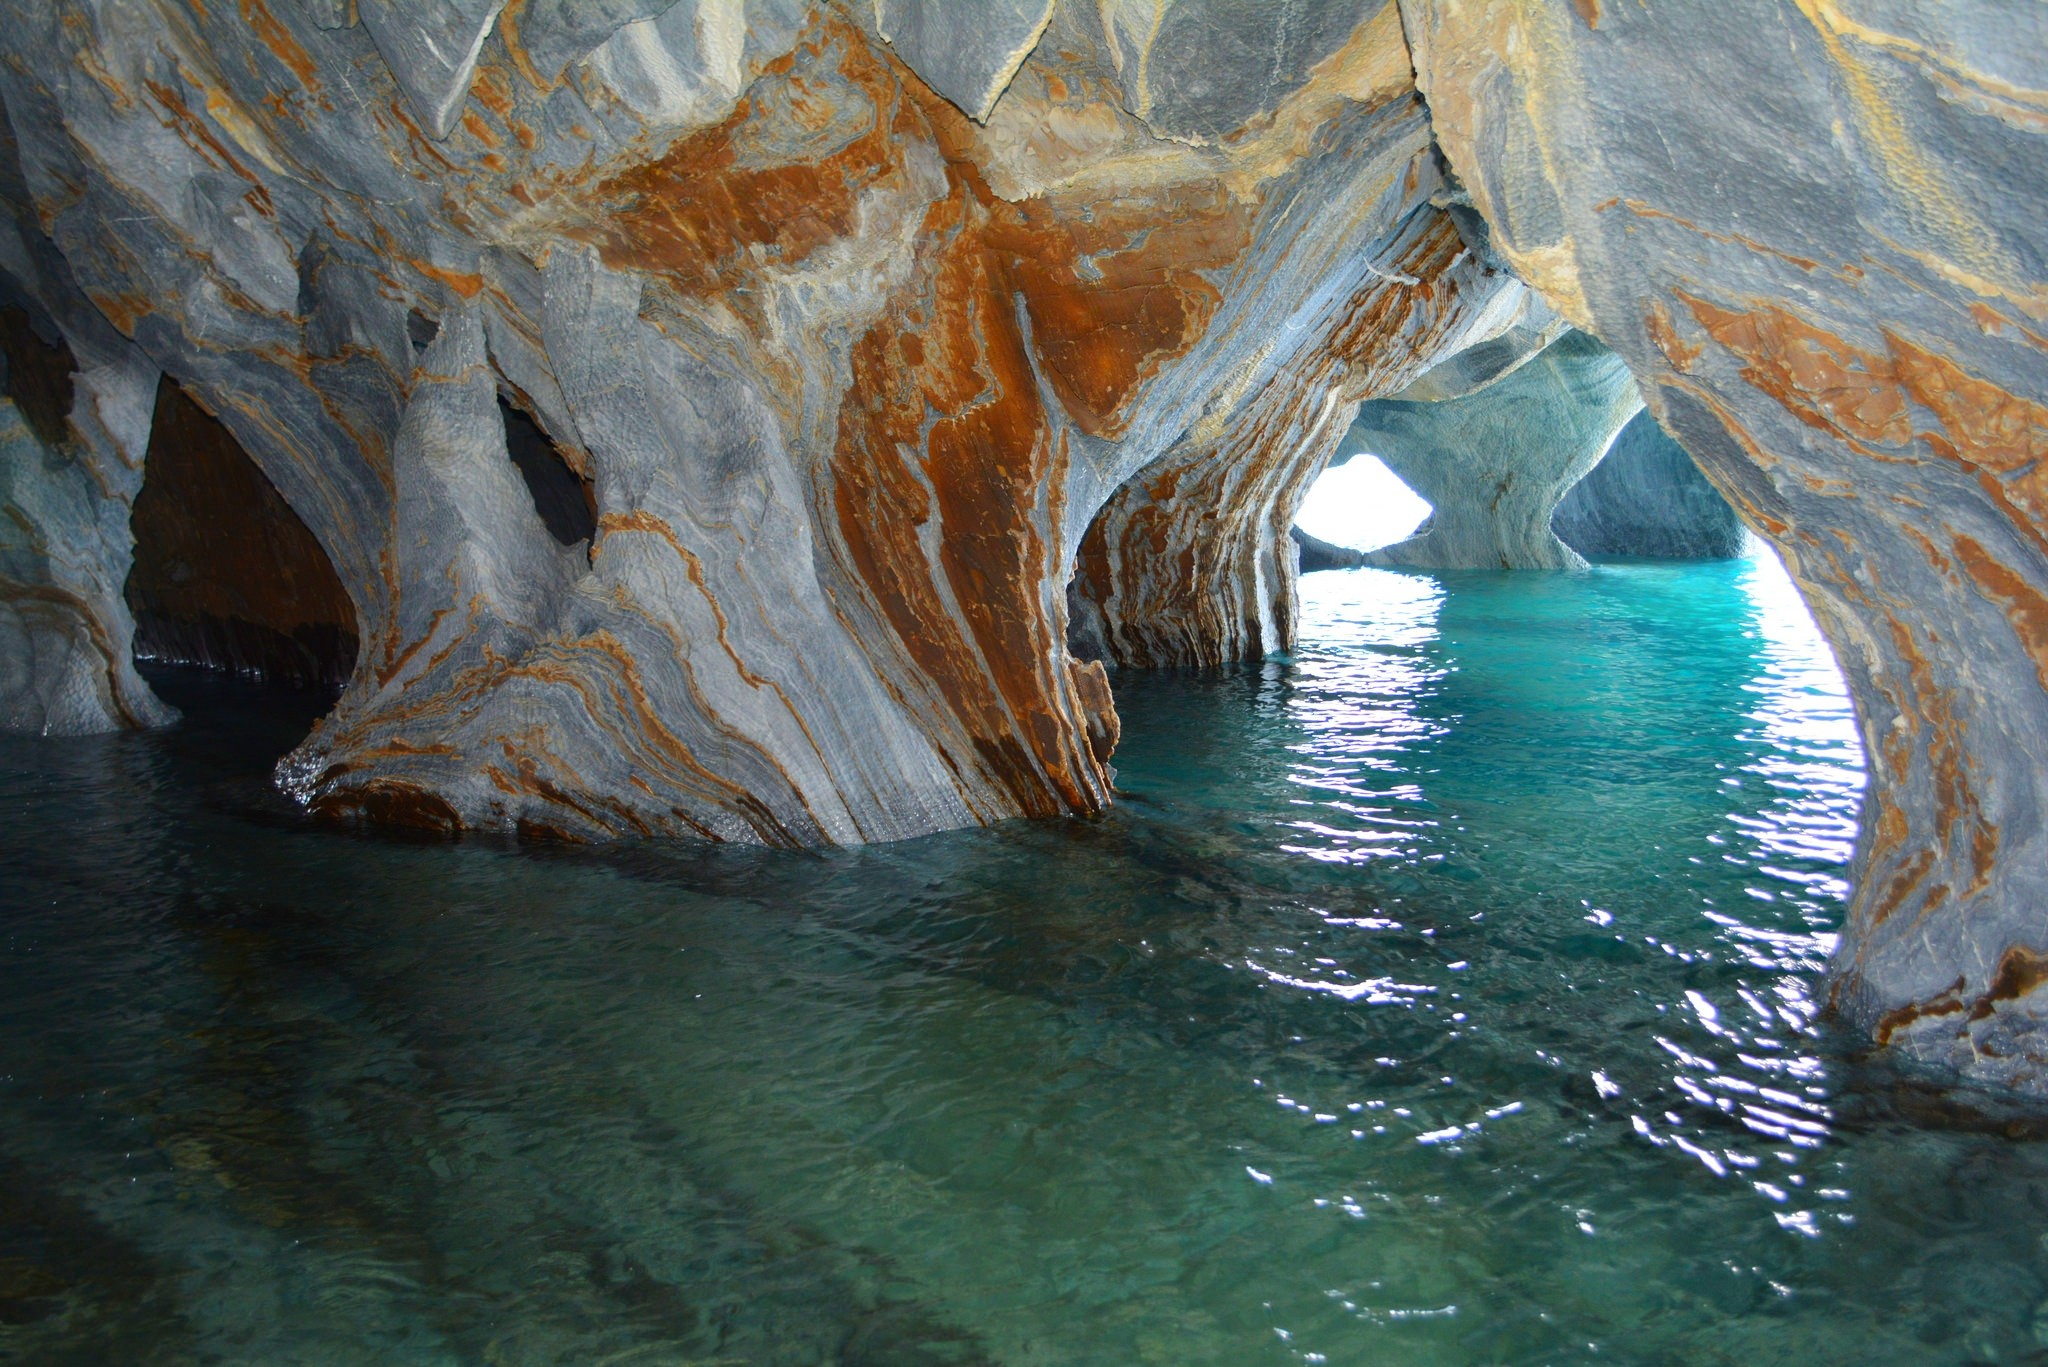 Photography Landscape Nature Lake Turquoise Water Cave Marble Chapel Erosion Chile 2048x1367